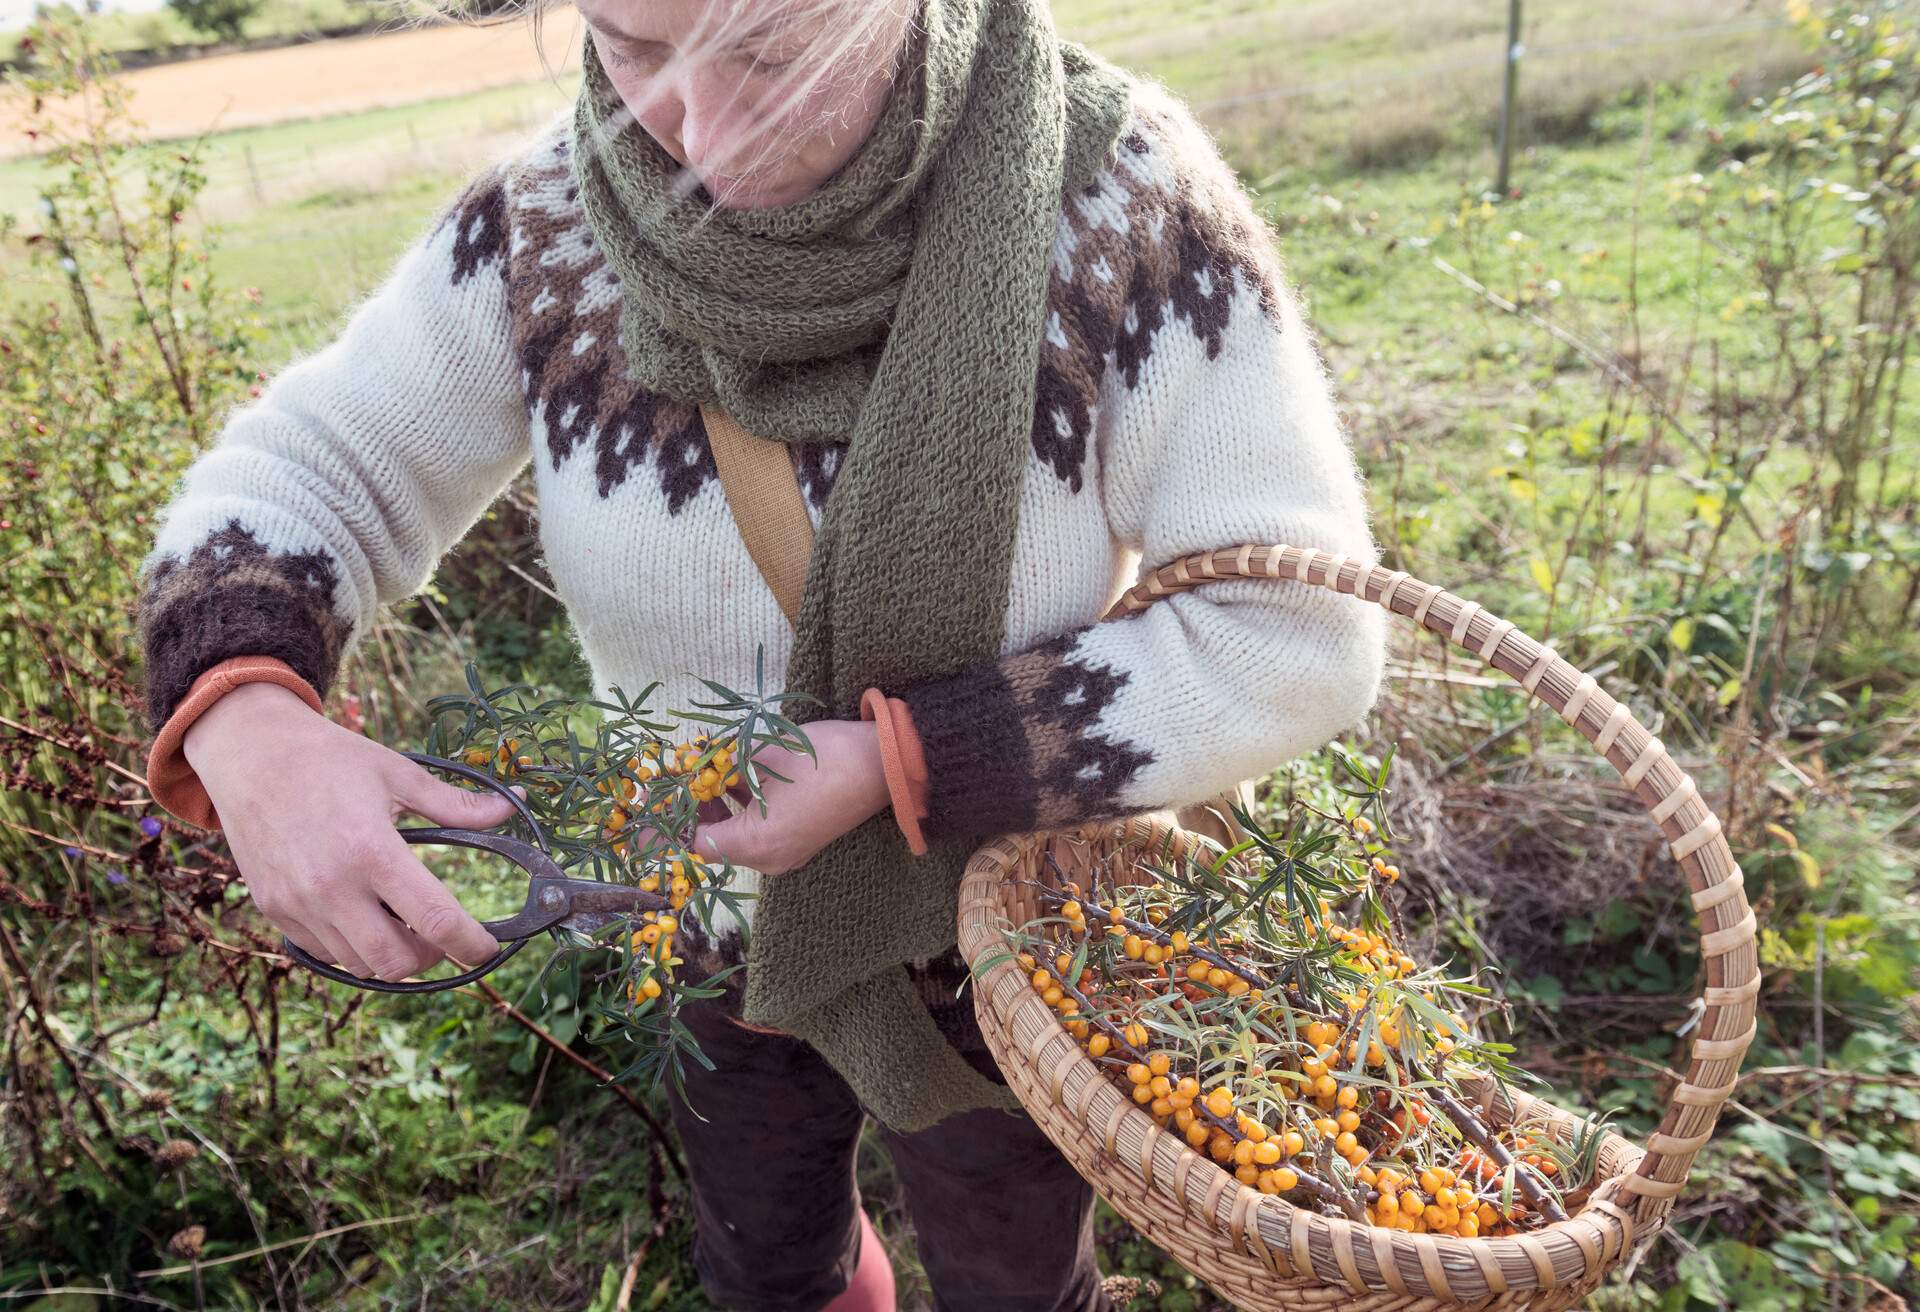 A food collector, with a basket of orange havtorn berries, pruning a stem.